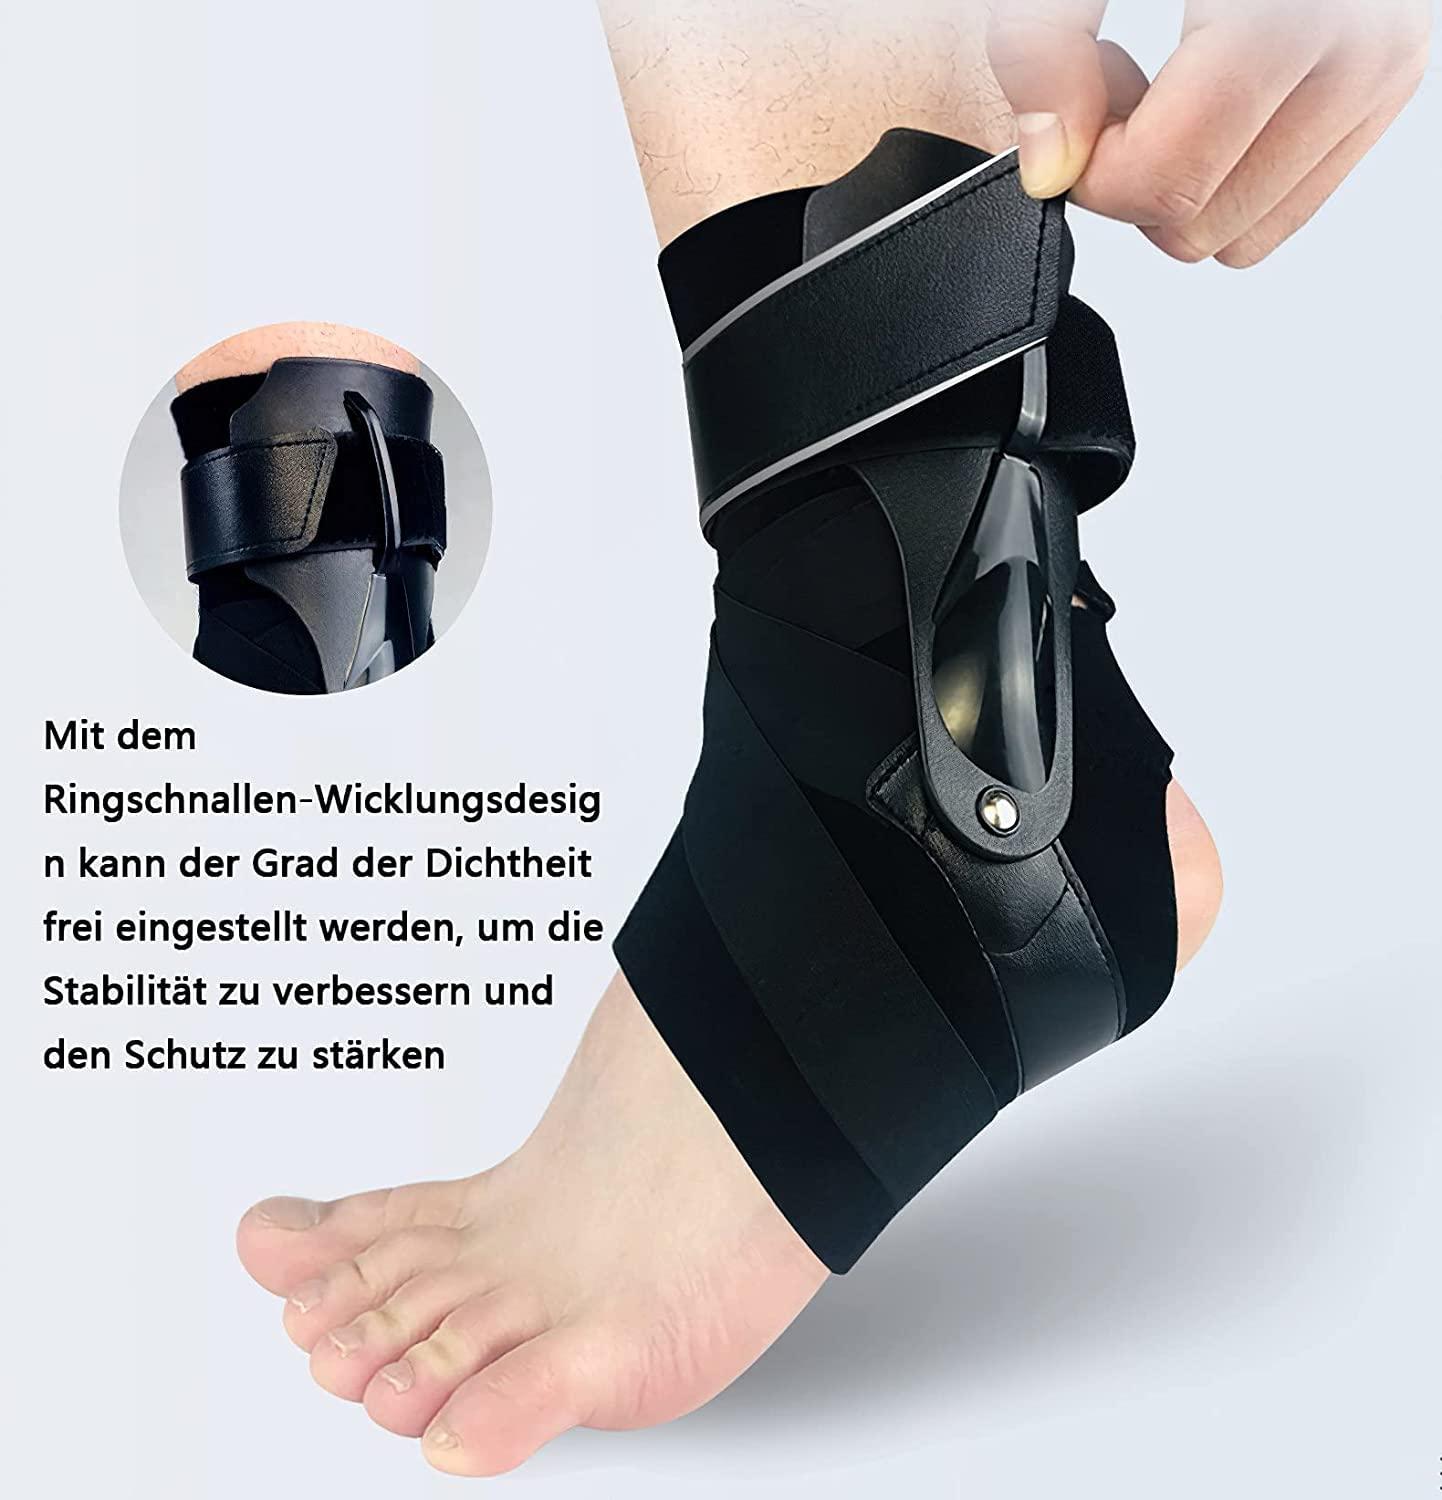 Adjustable Foot Ankle Support Belt Foot Injury Pain Wrap Strap Safety  Protector Foot - Large